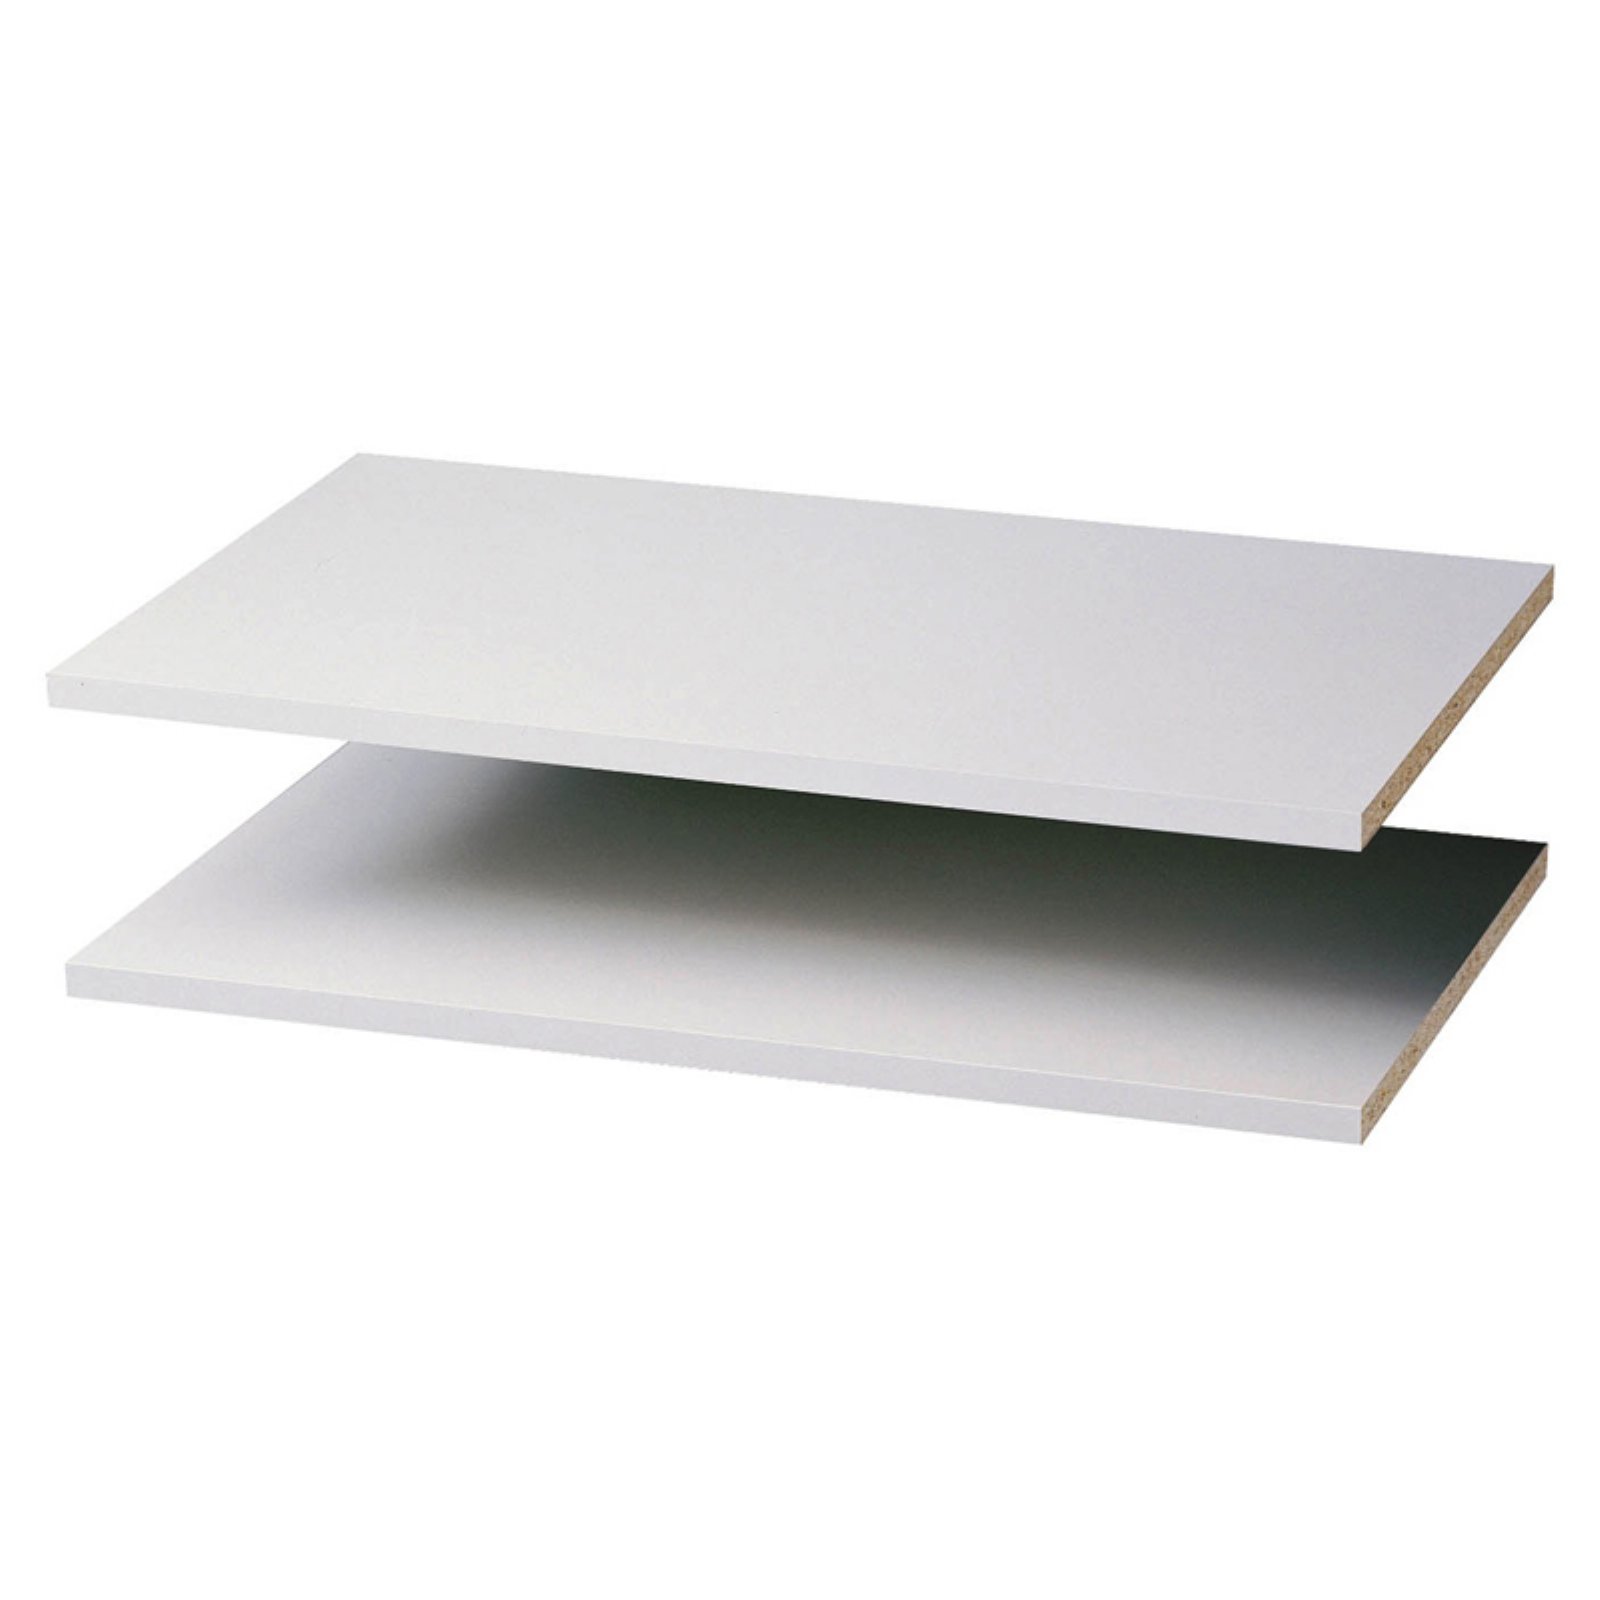 Easy Track Rs1423 24" Shelves - White (2 Count) - image 3 of 3